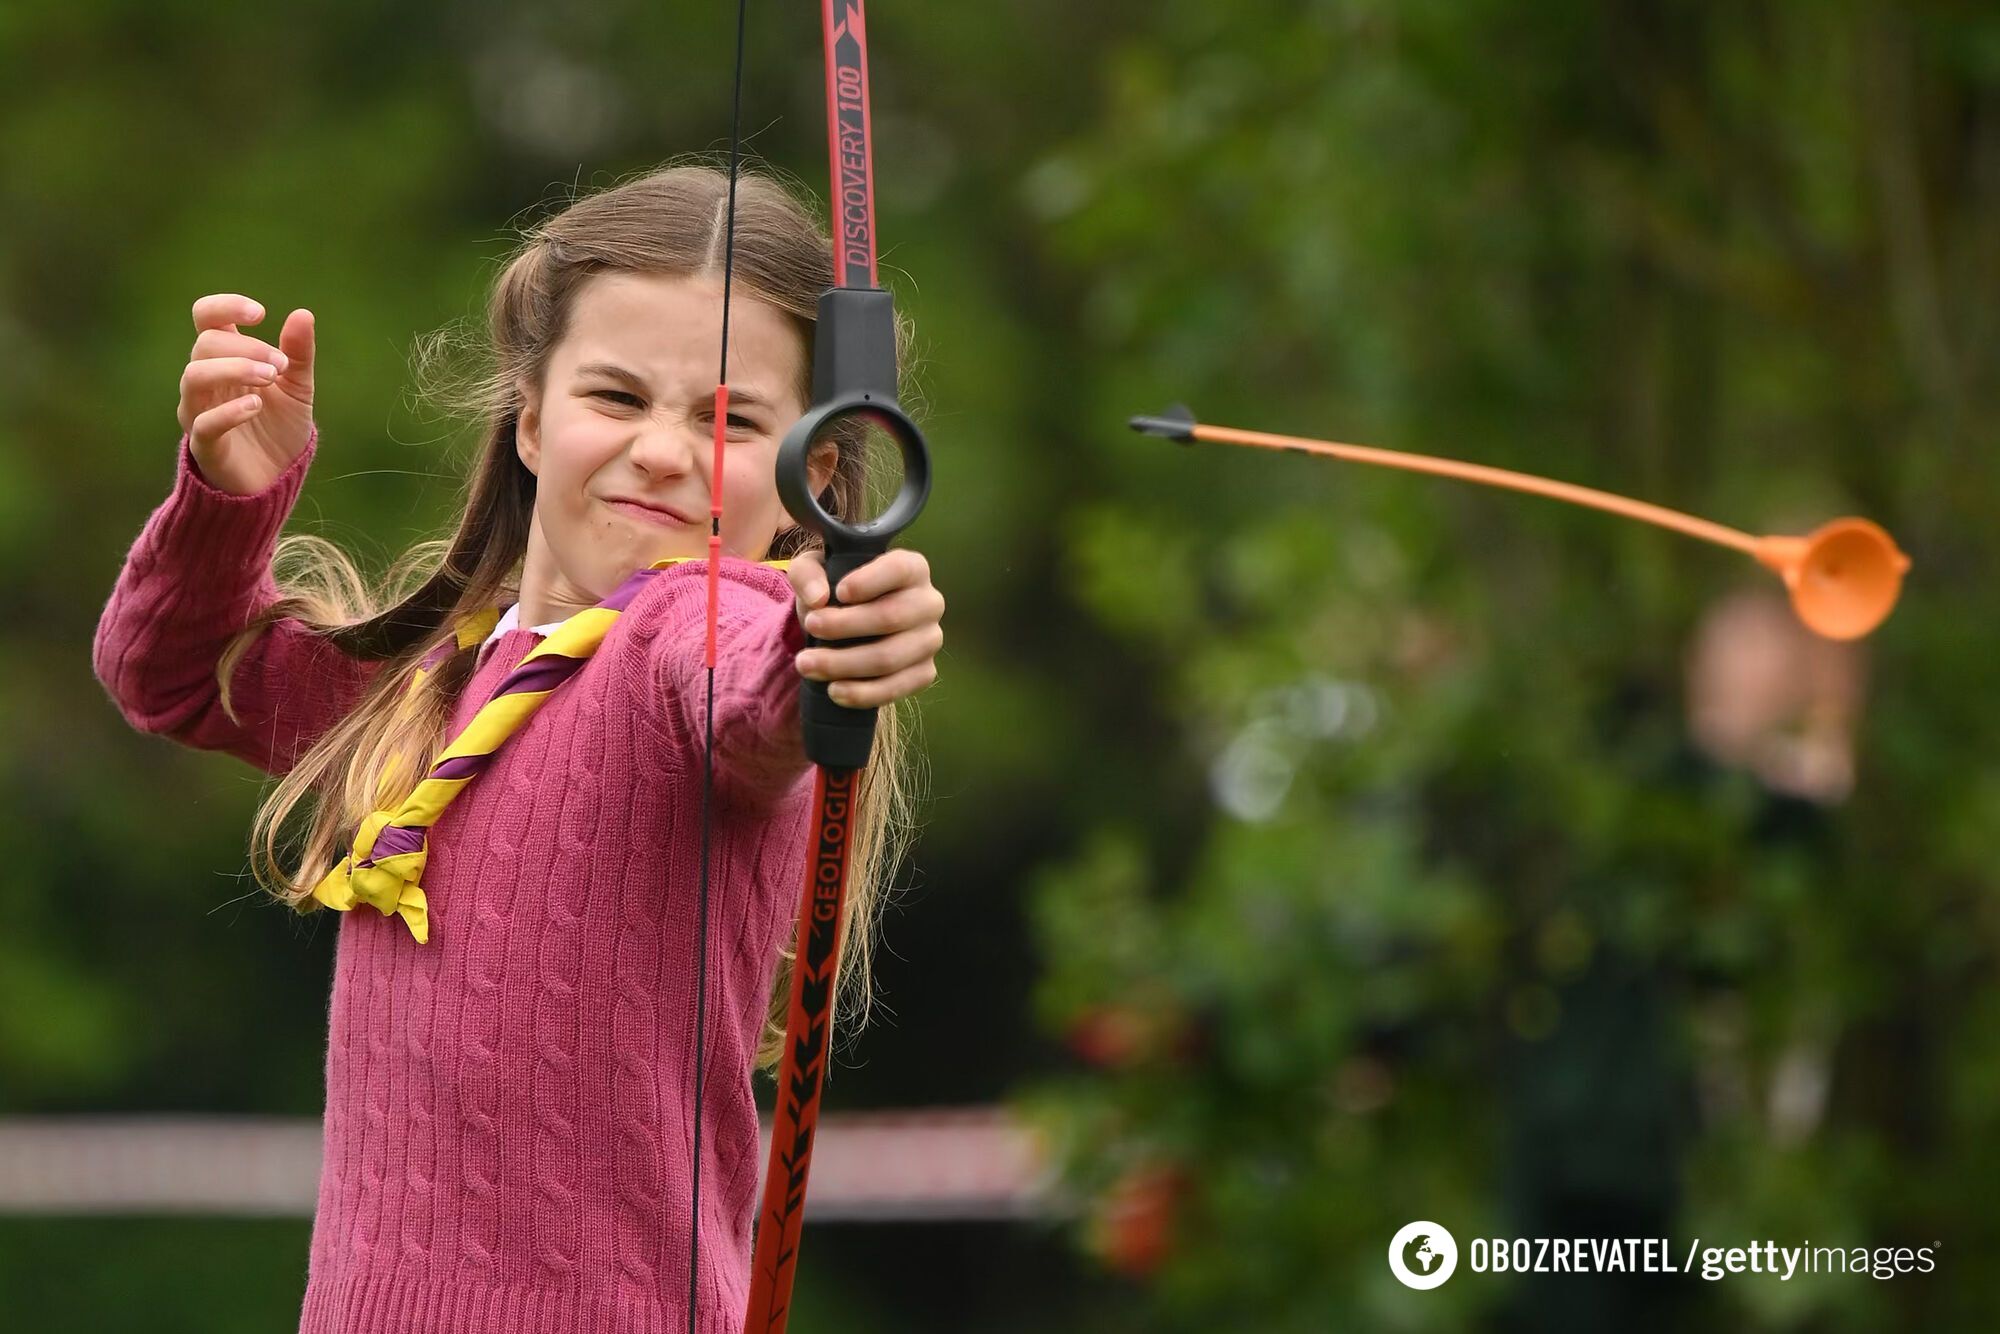 Ponyback riding, archery and other hobbies that Princess Charlotte took over from Kate Middleton, Elizabeth II and more